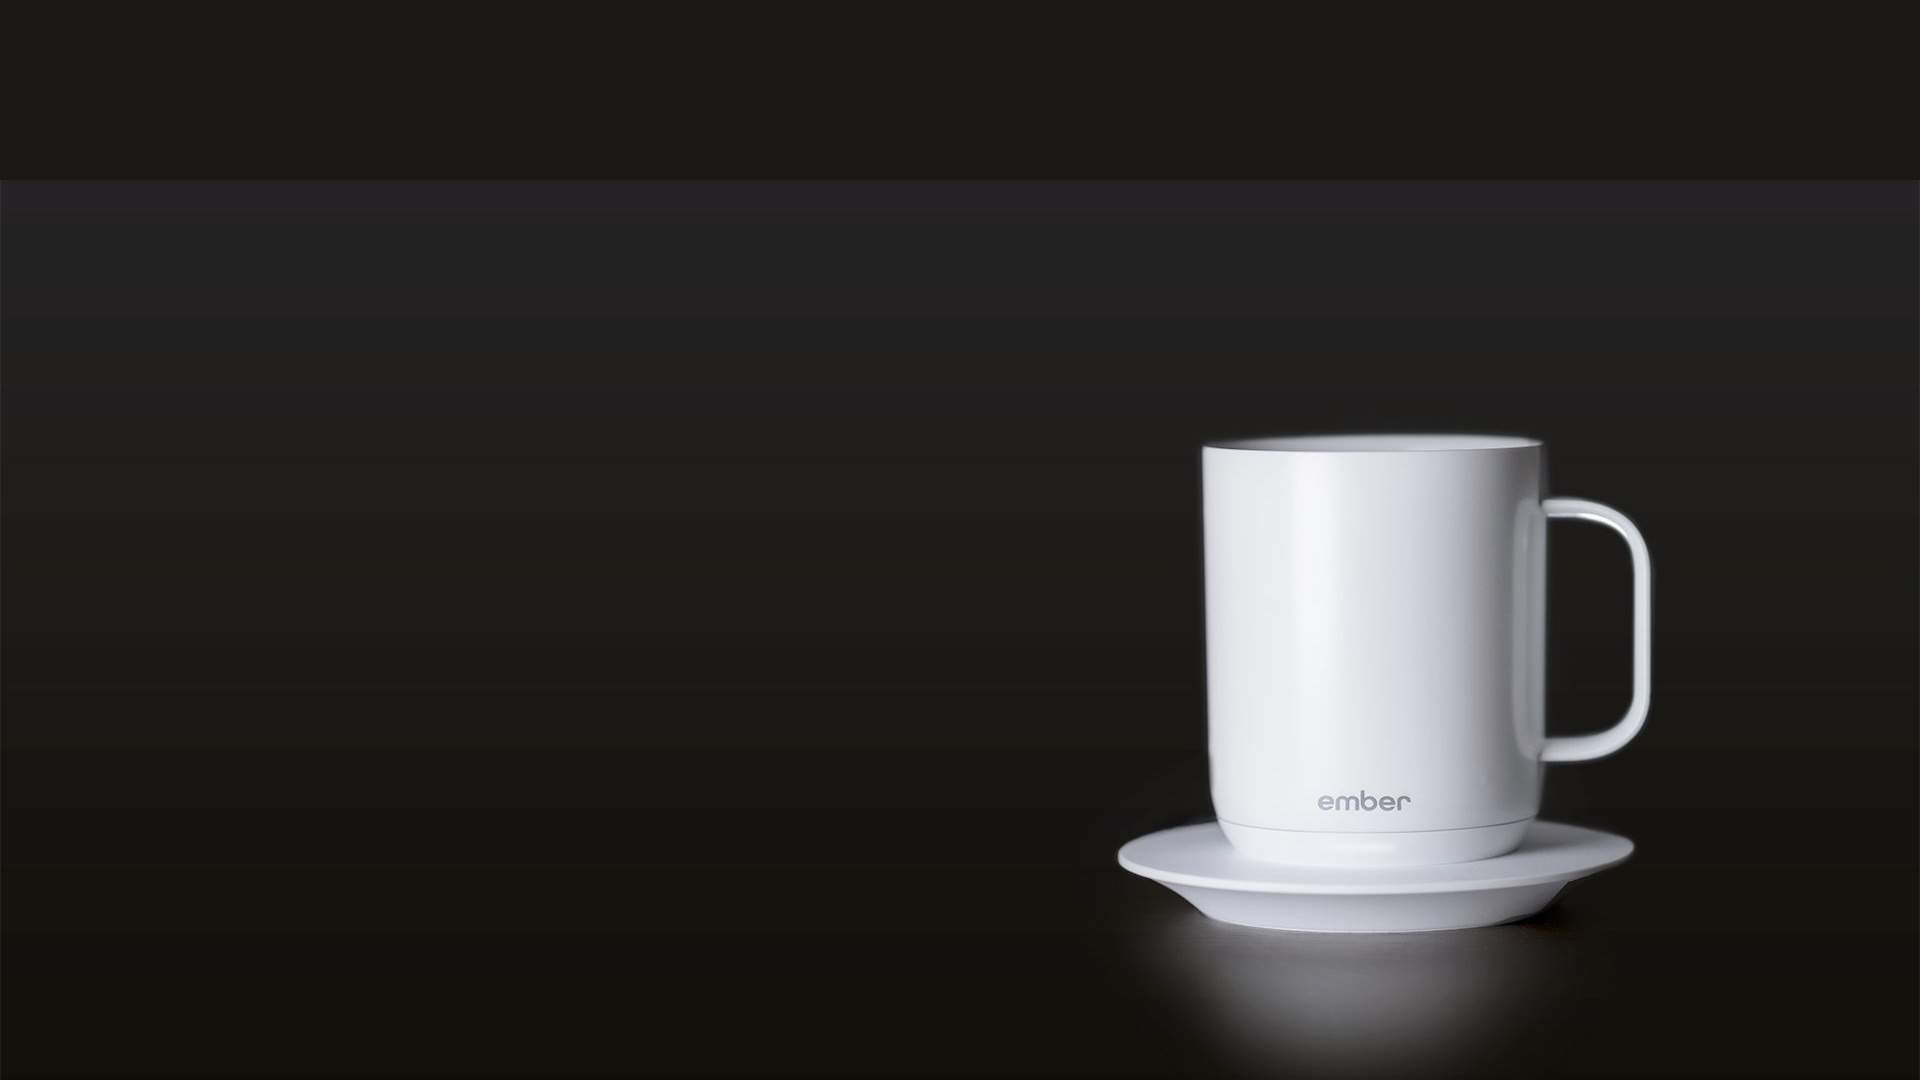 This New Ember Smart Mug Keeps Your Coffee at the Perfect Temperature